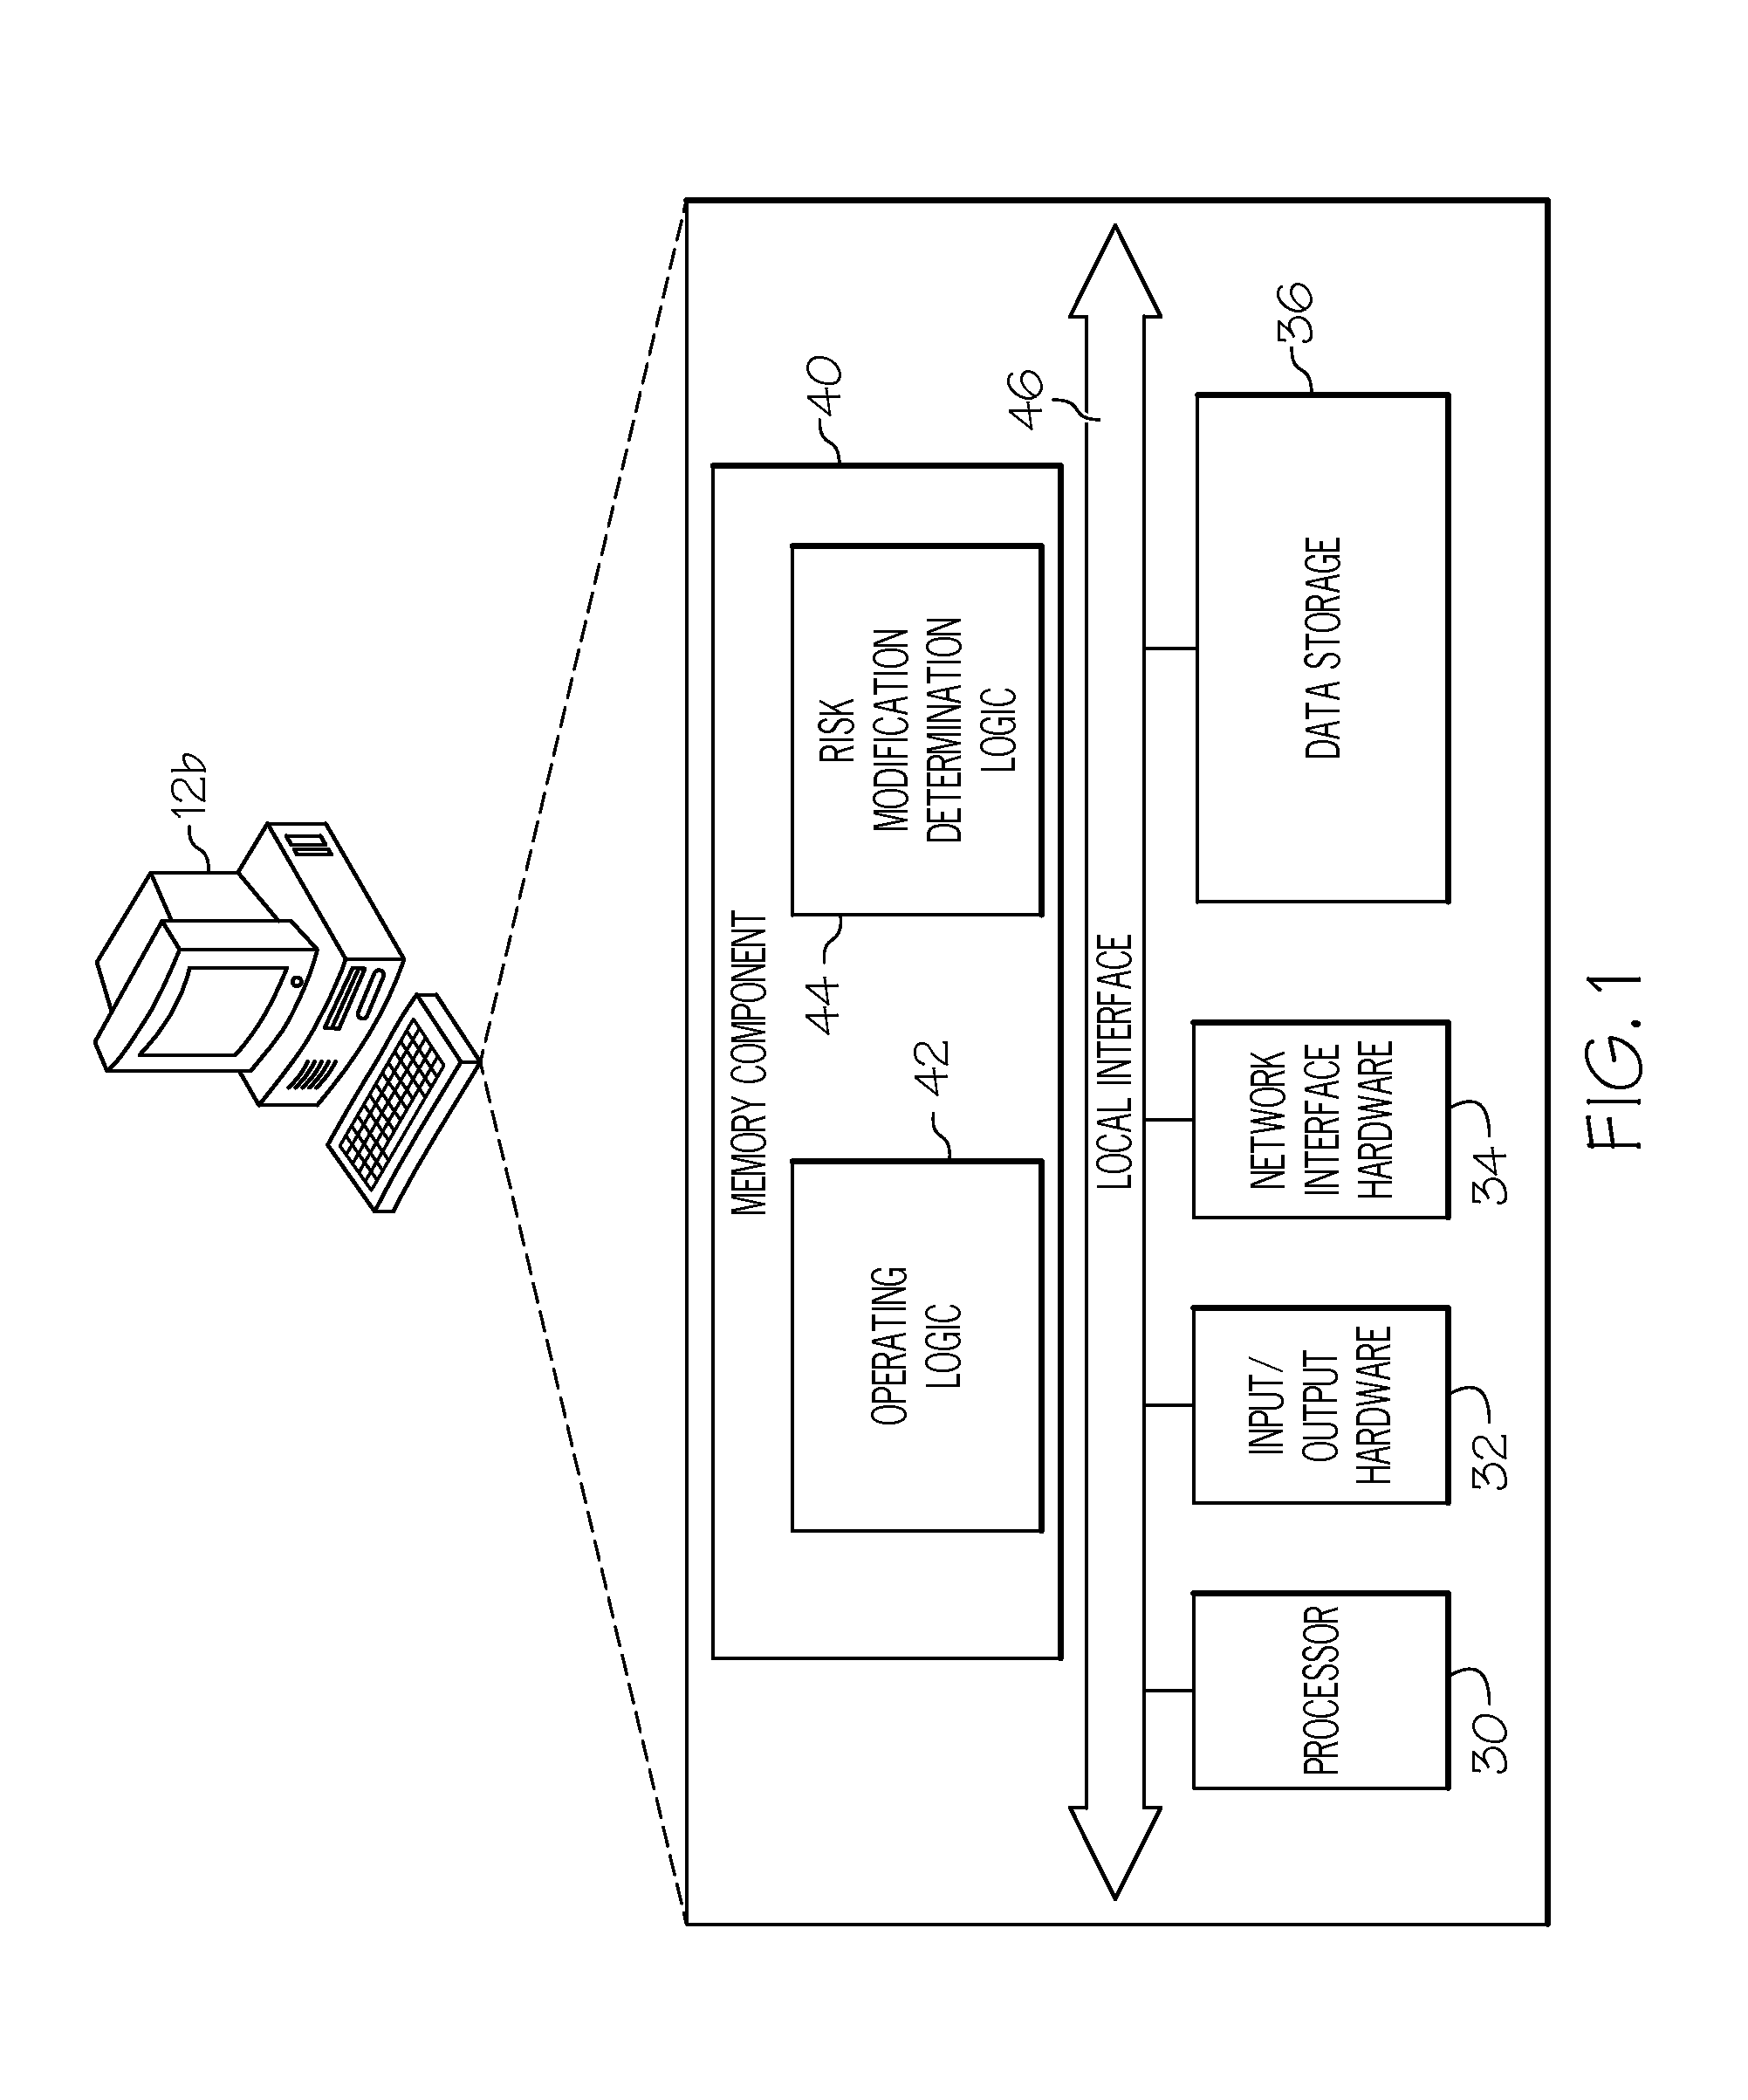 Systems and methods for determining overall risk modification amounts